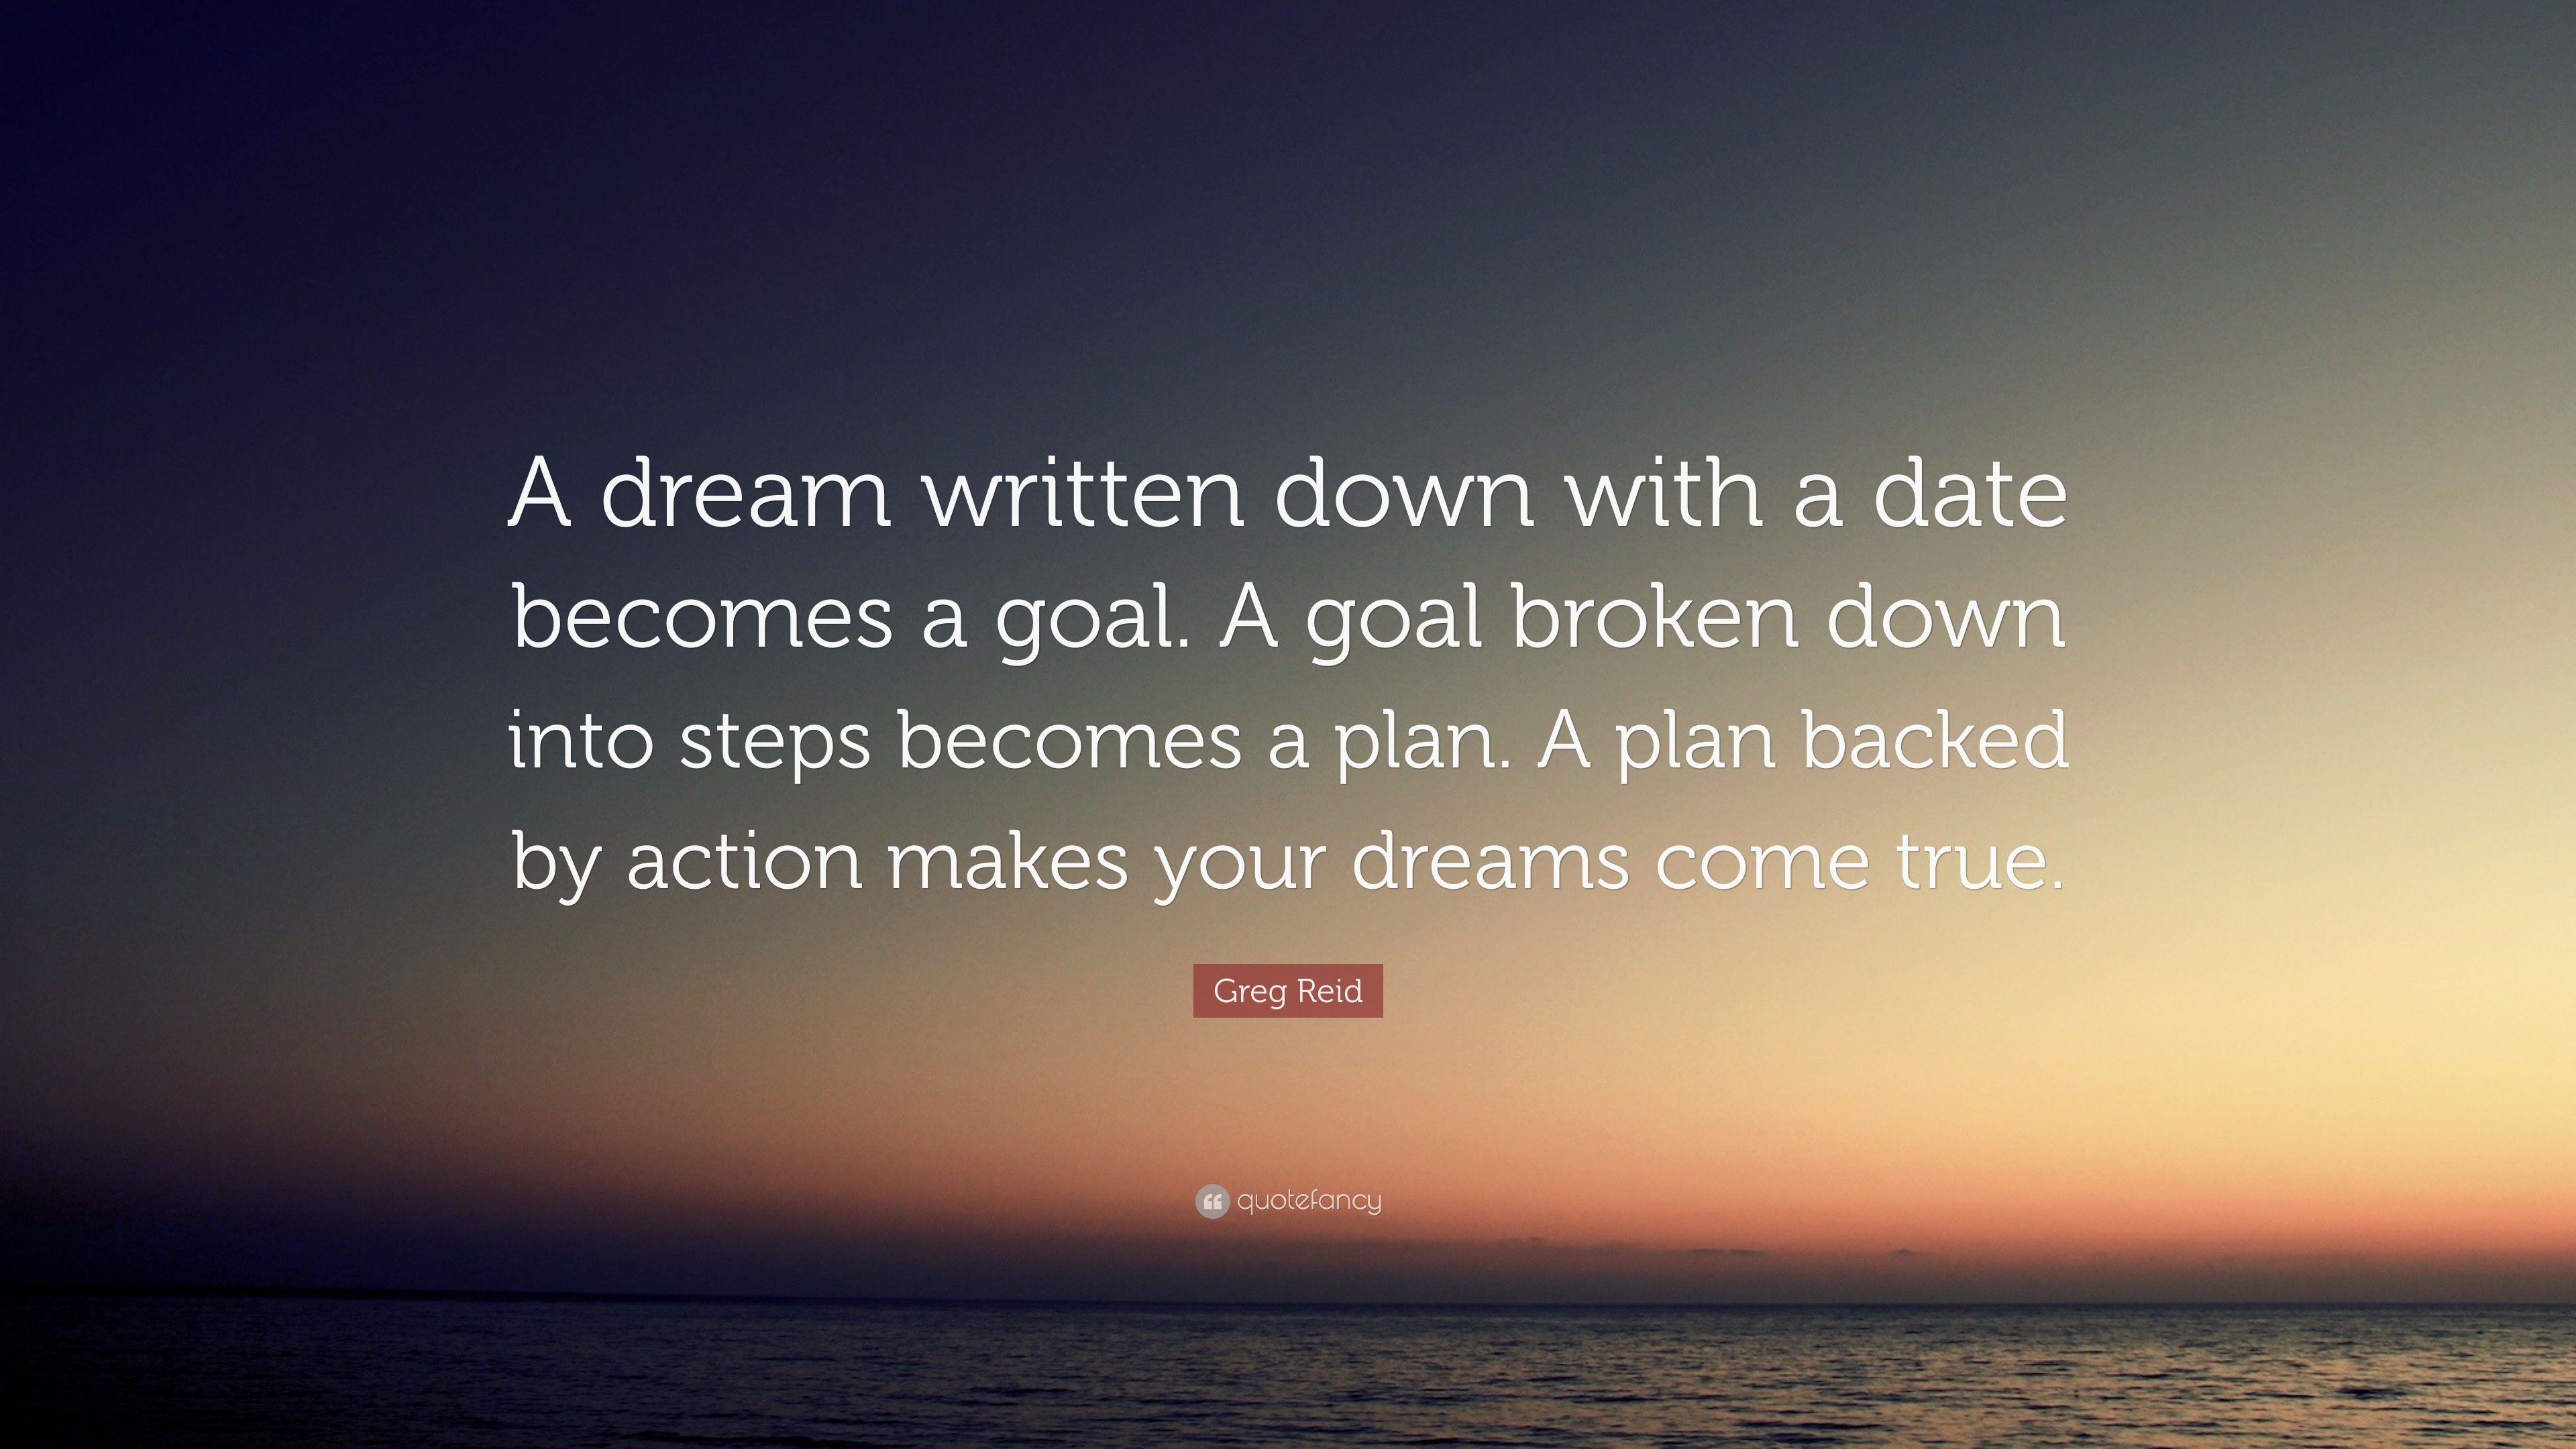 Greg Reid Quote: “A dream written down with a date becomes a goal. A